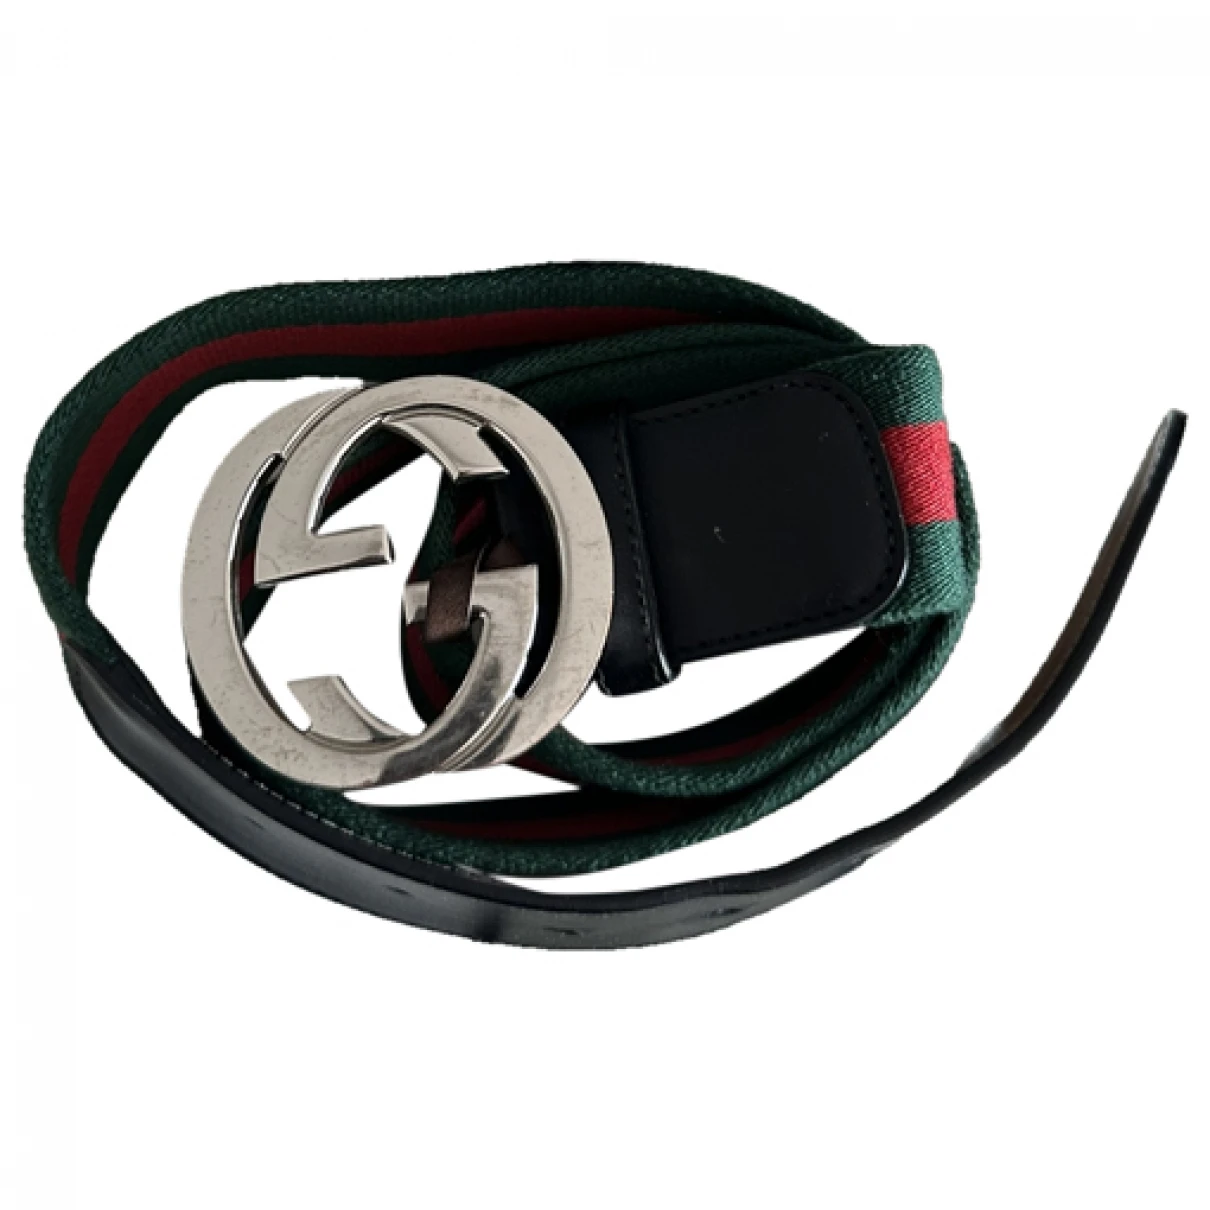 accessories Gucci belts Interlocking Buckle for Female Cloth L International. Used condition